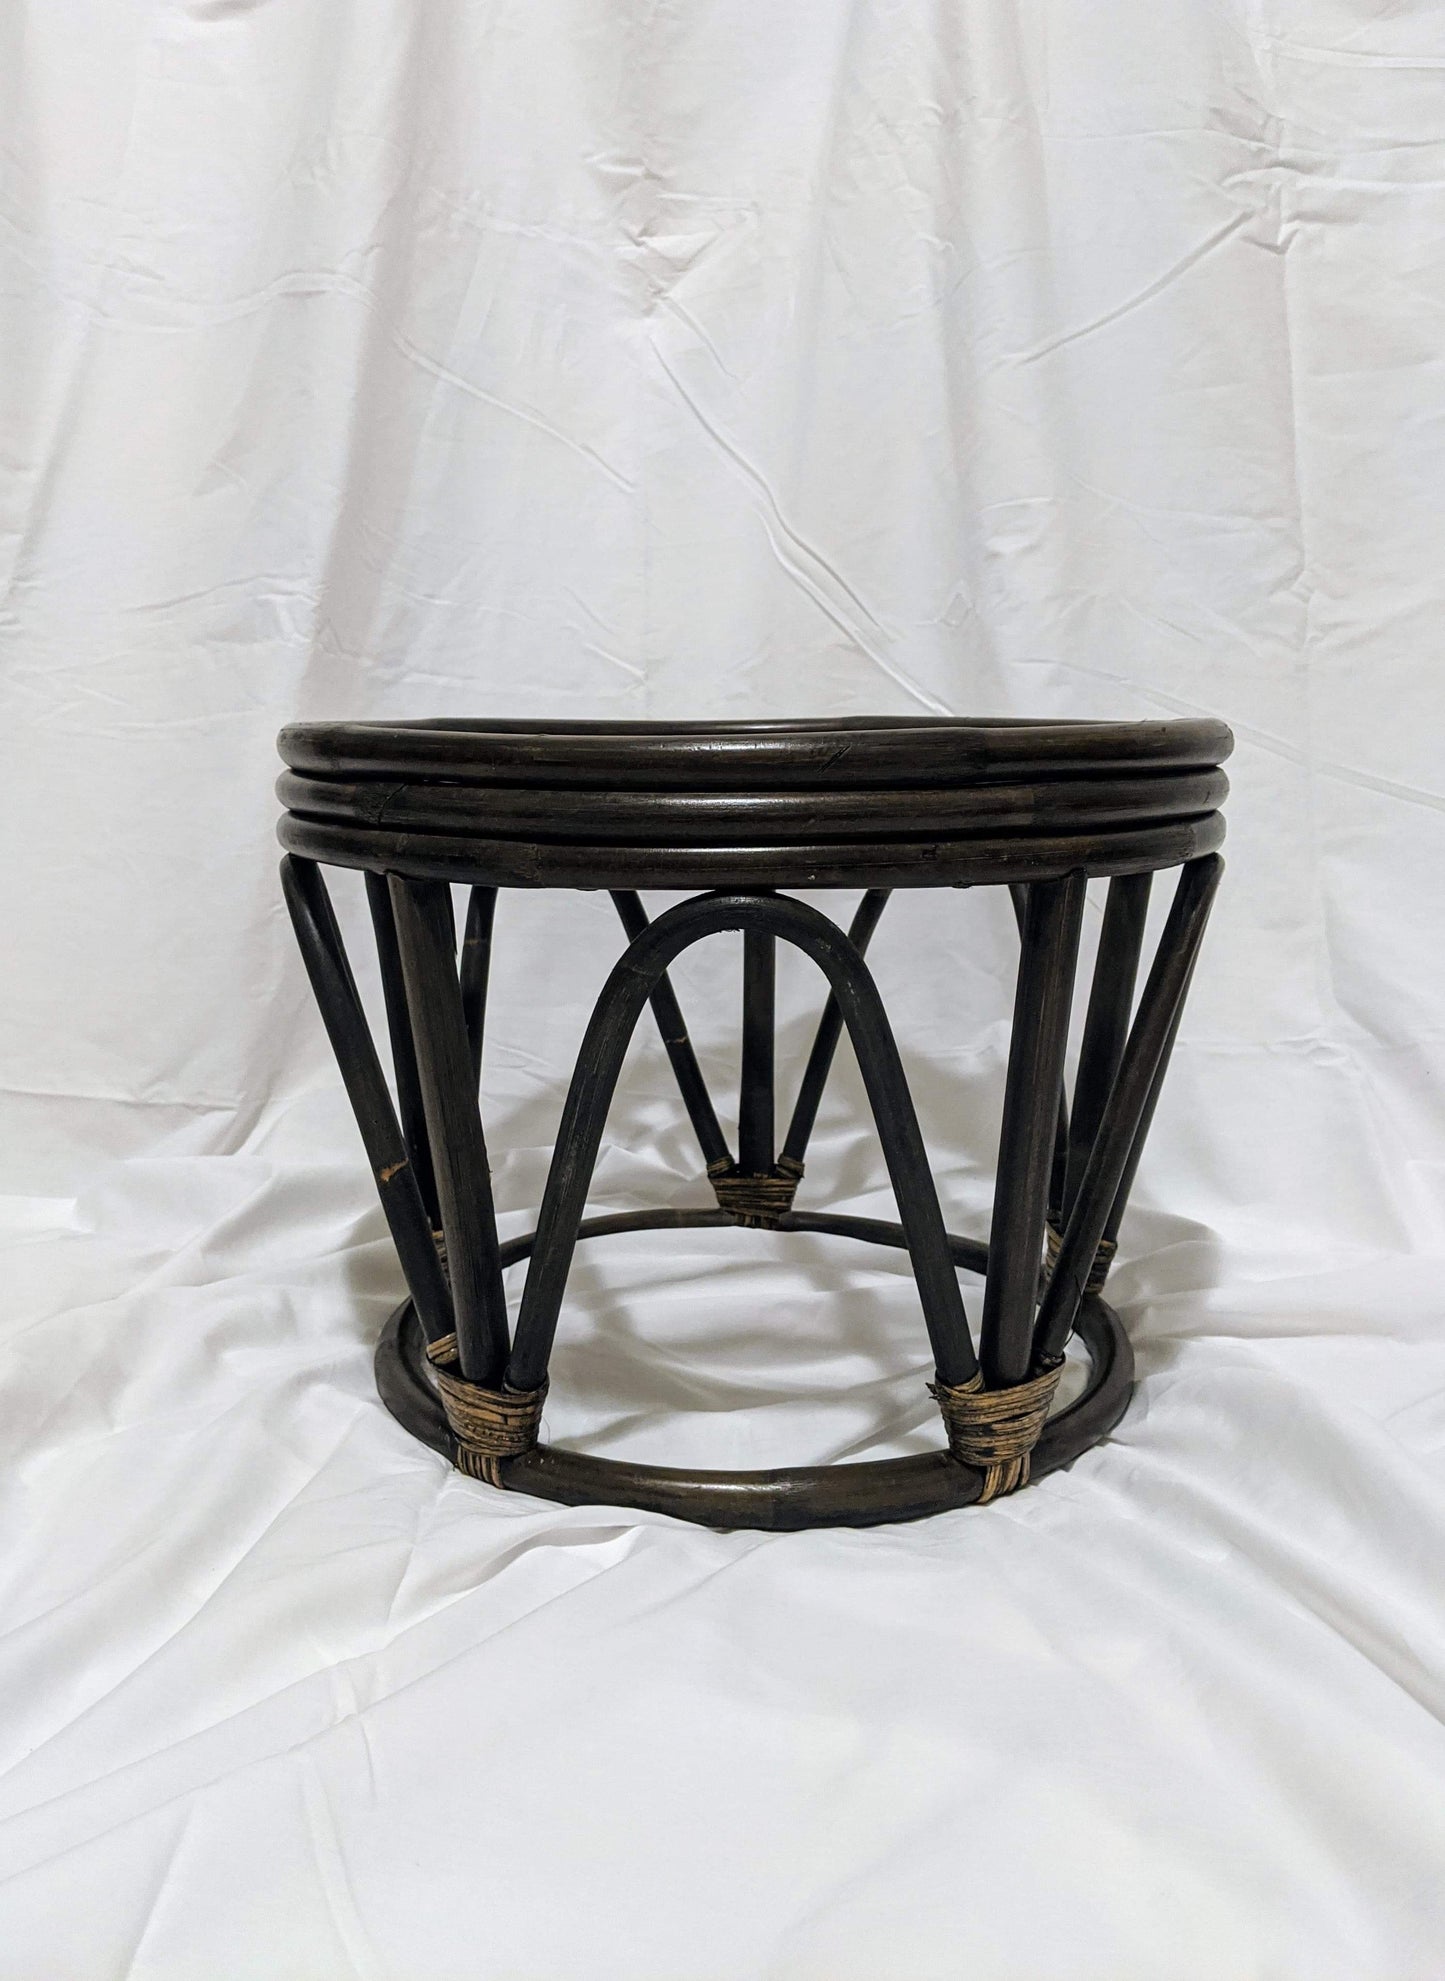 This Is A Plant Stand